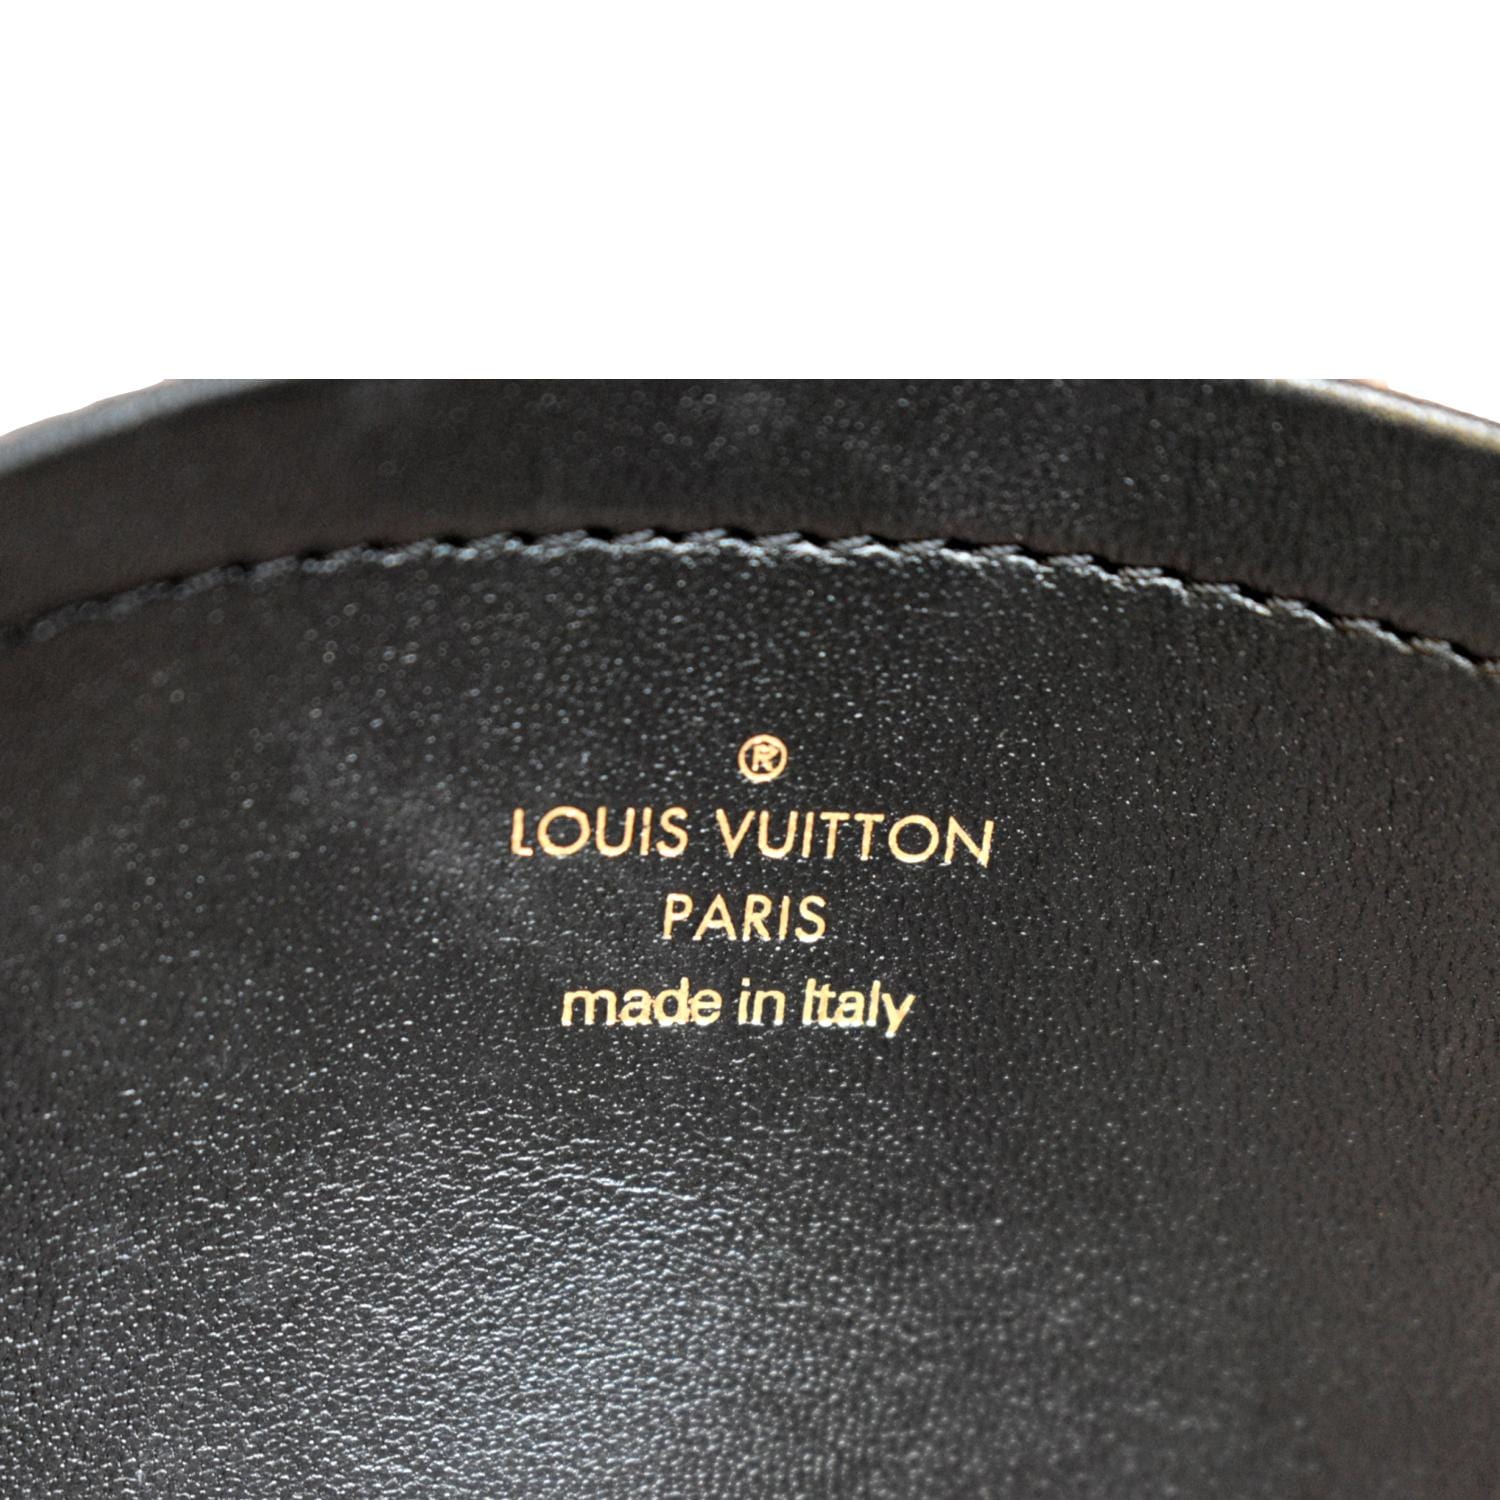 Louis Vuitton Coussin Pochette Black Monogram Embossed Leather Bag New Tag